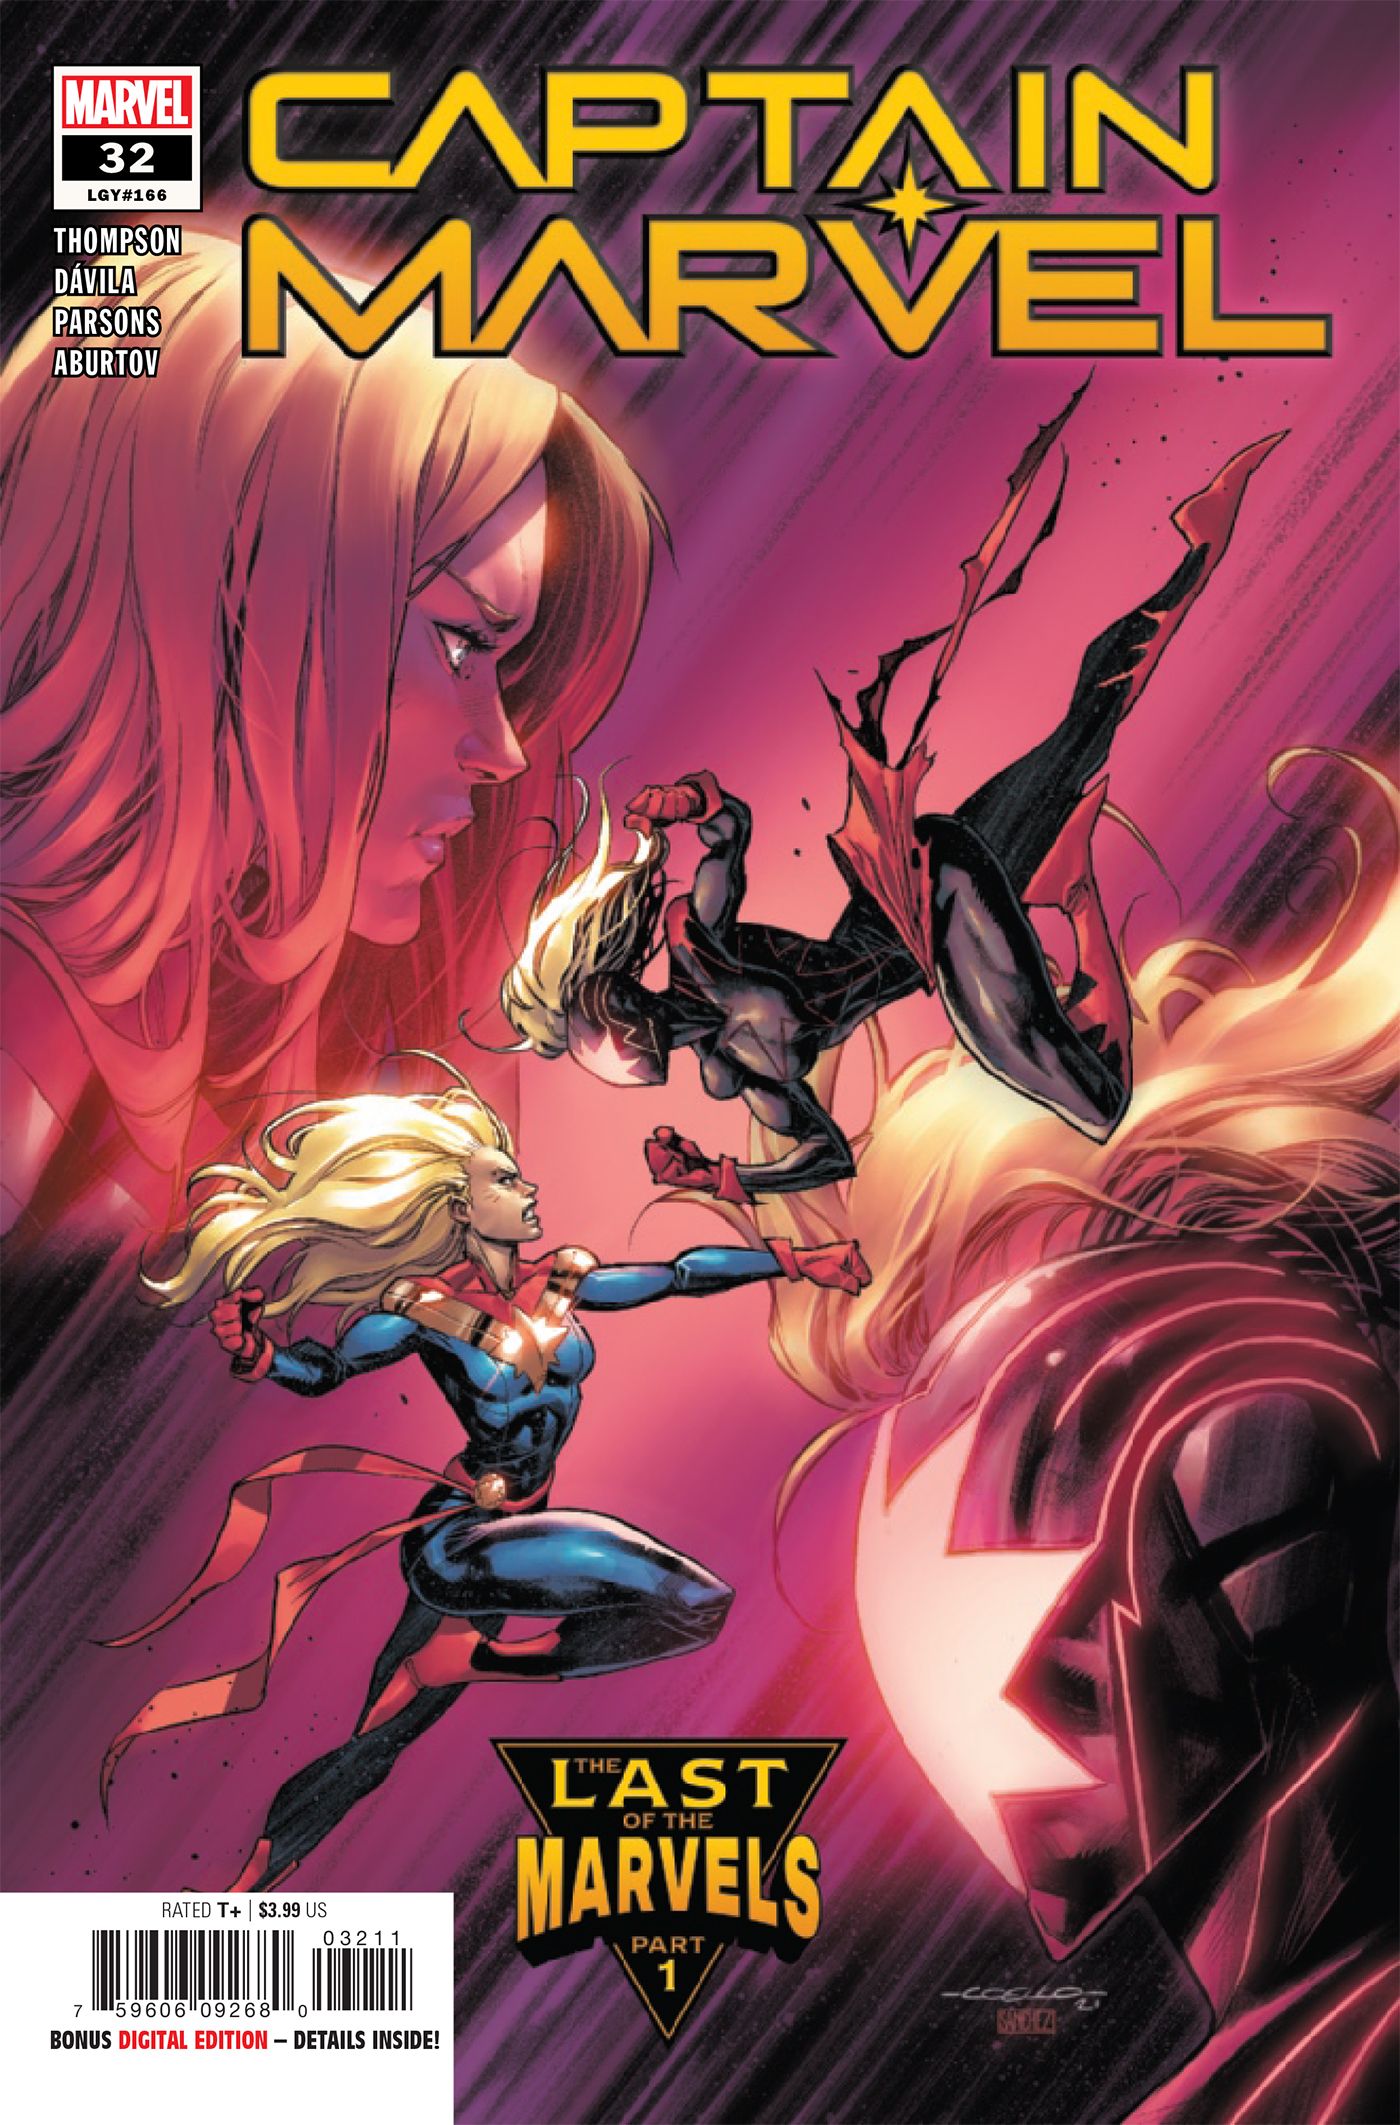 Captain Marvel faces off against the new host of the Last Avenger suit.